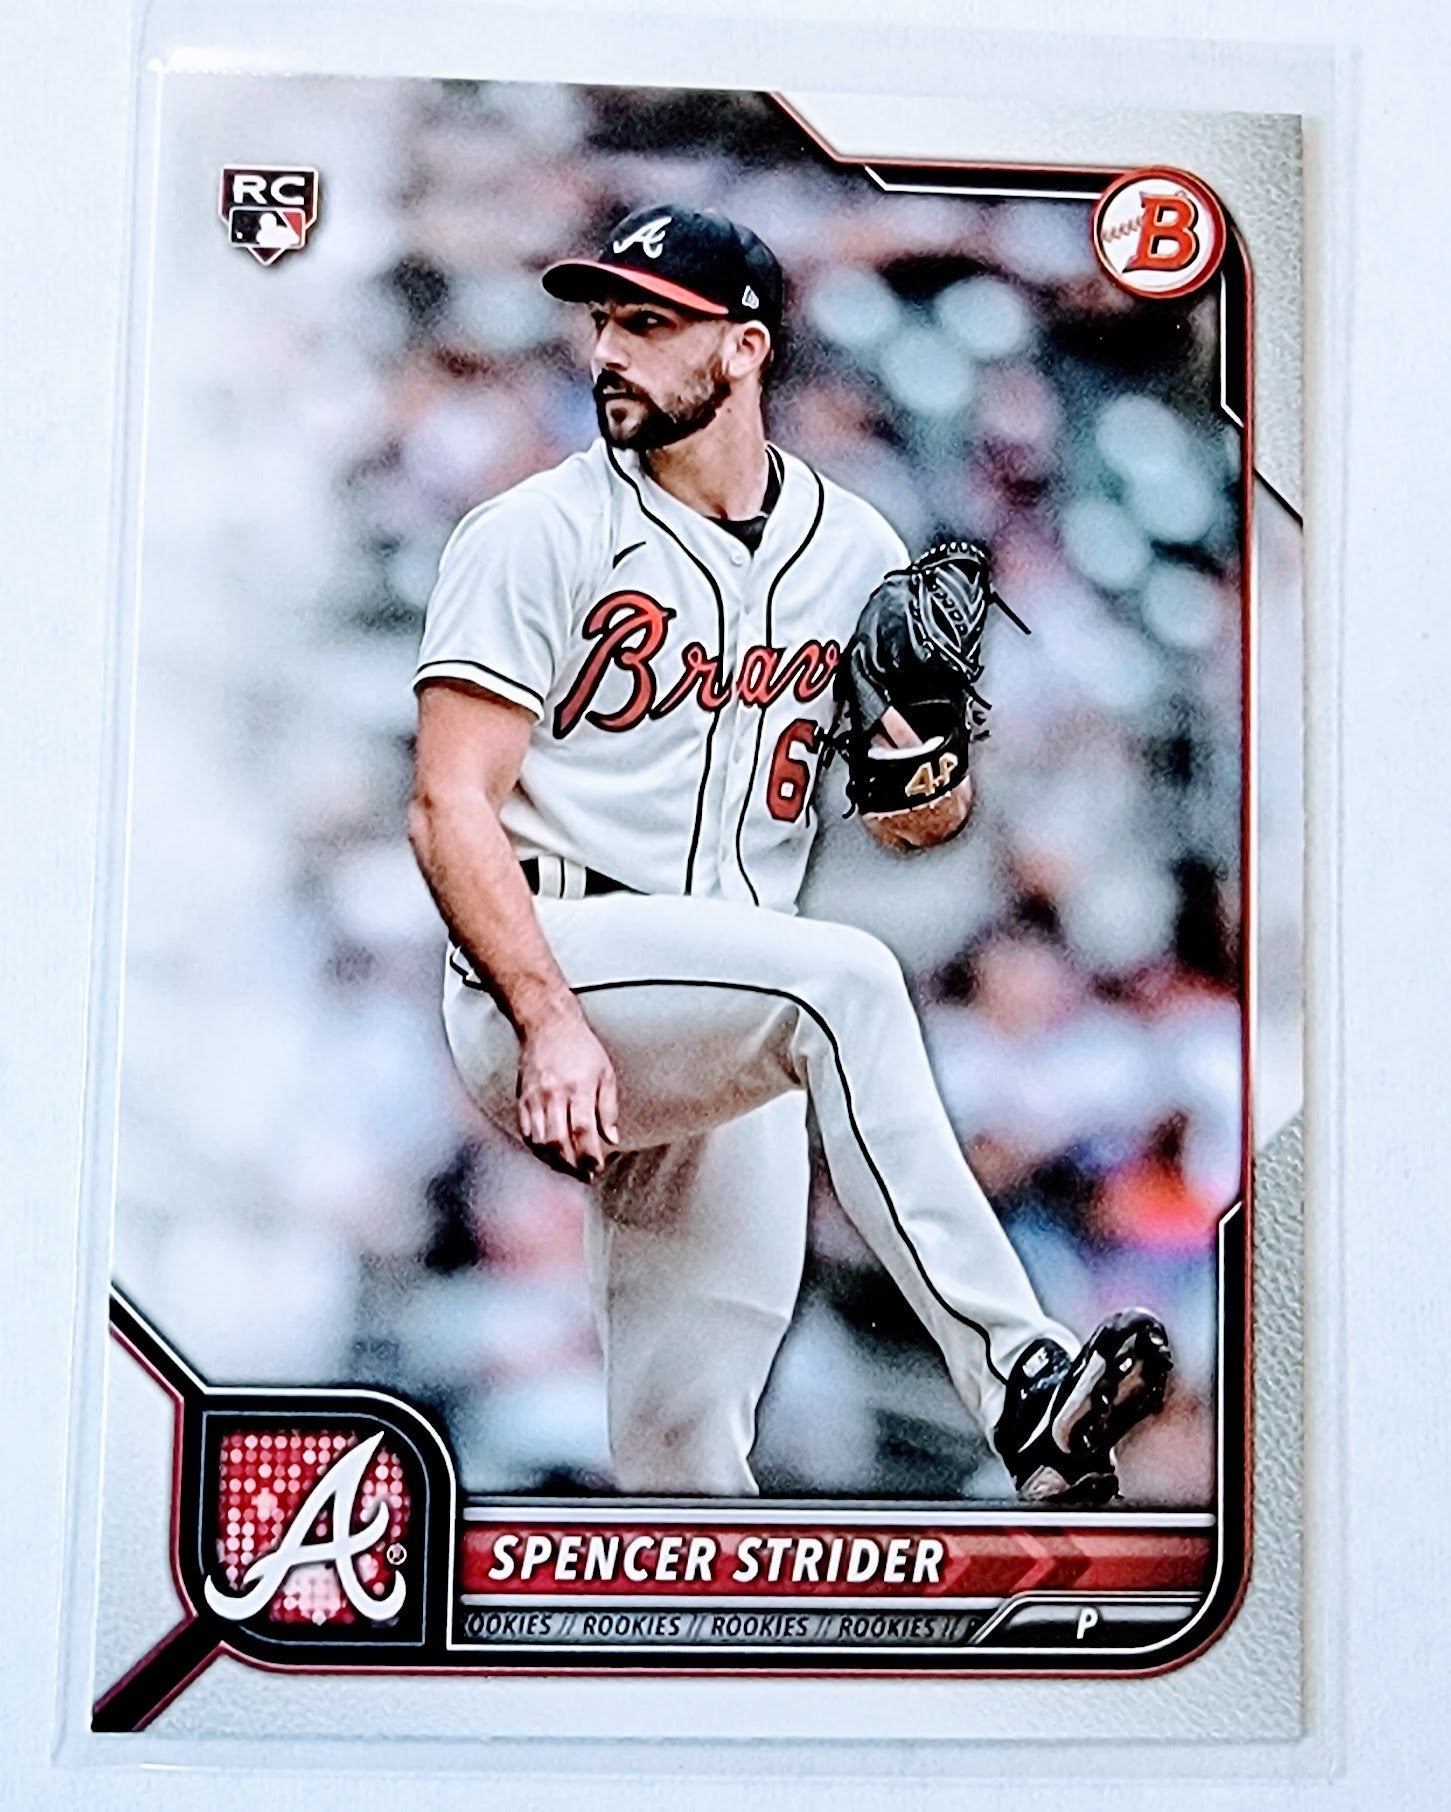 2022 Bowman Spencer Strider Rookie Baseball Trading Card SMCB1 simple Xclusive Collectibles   